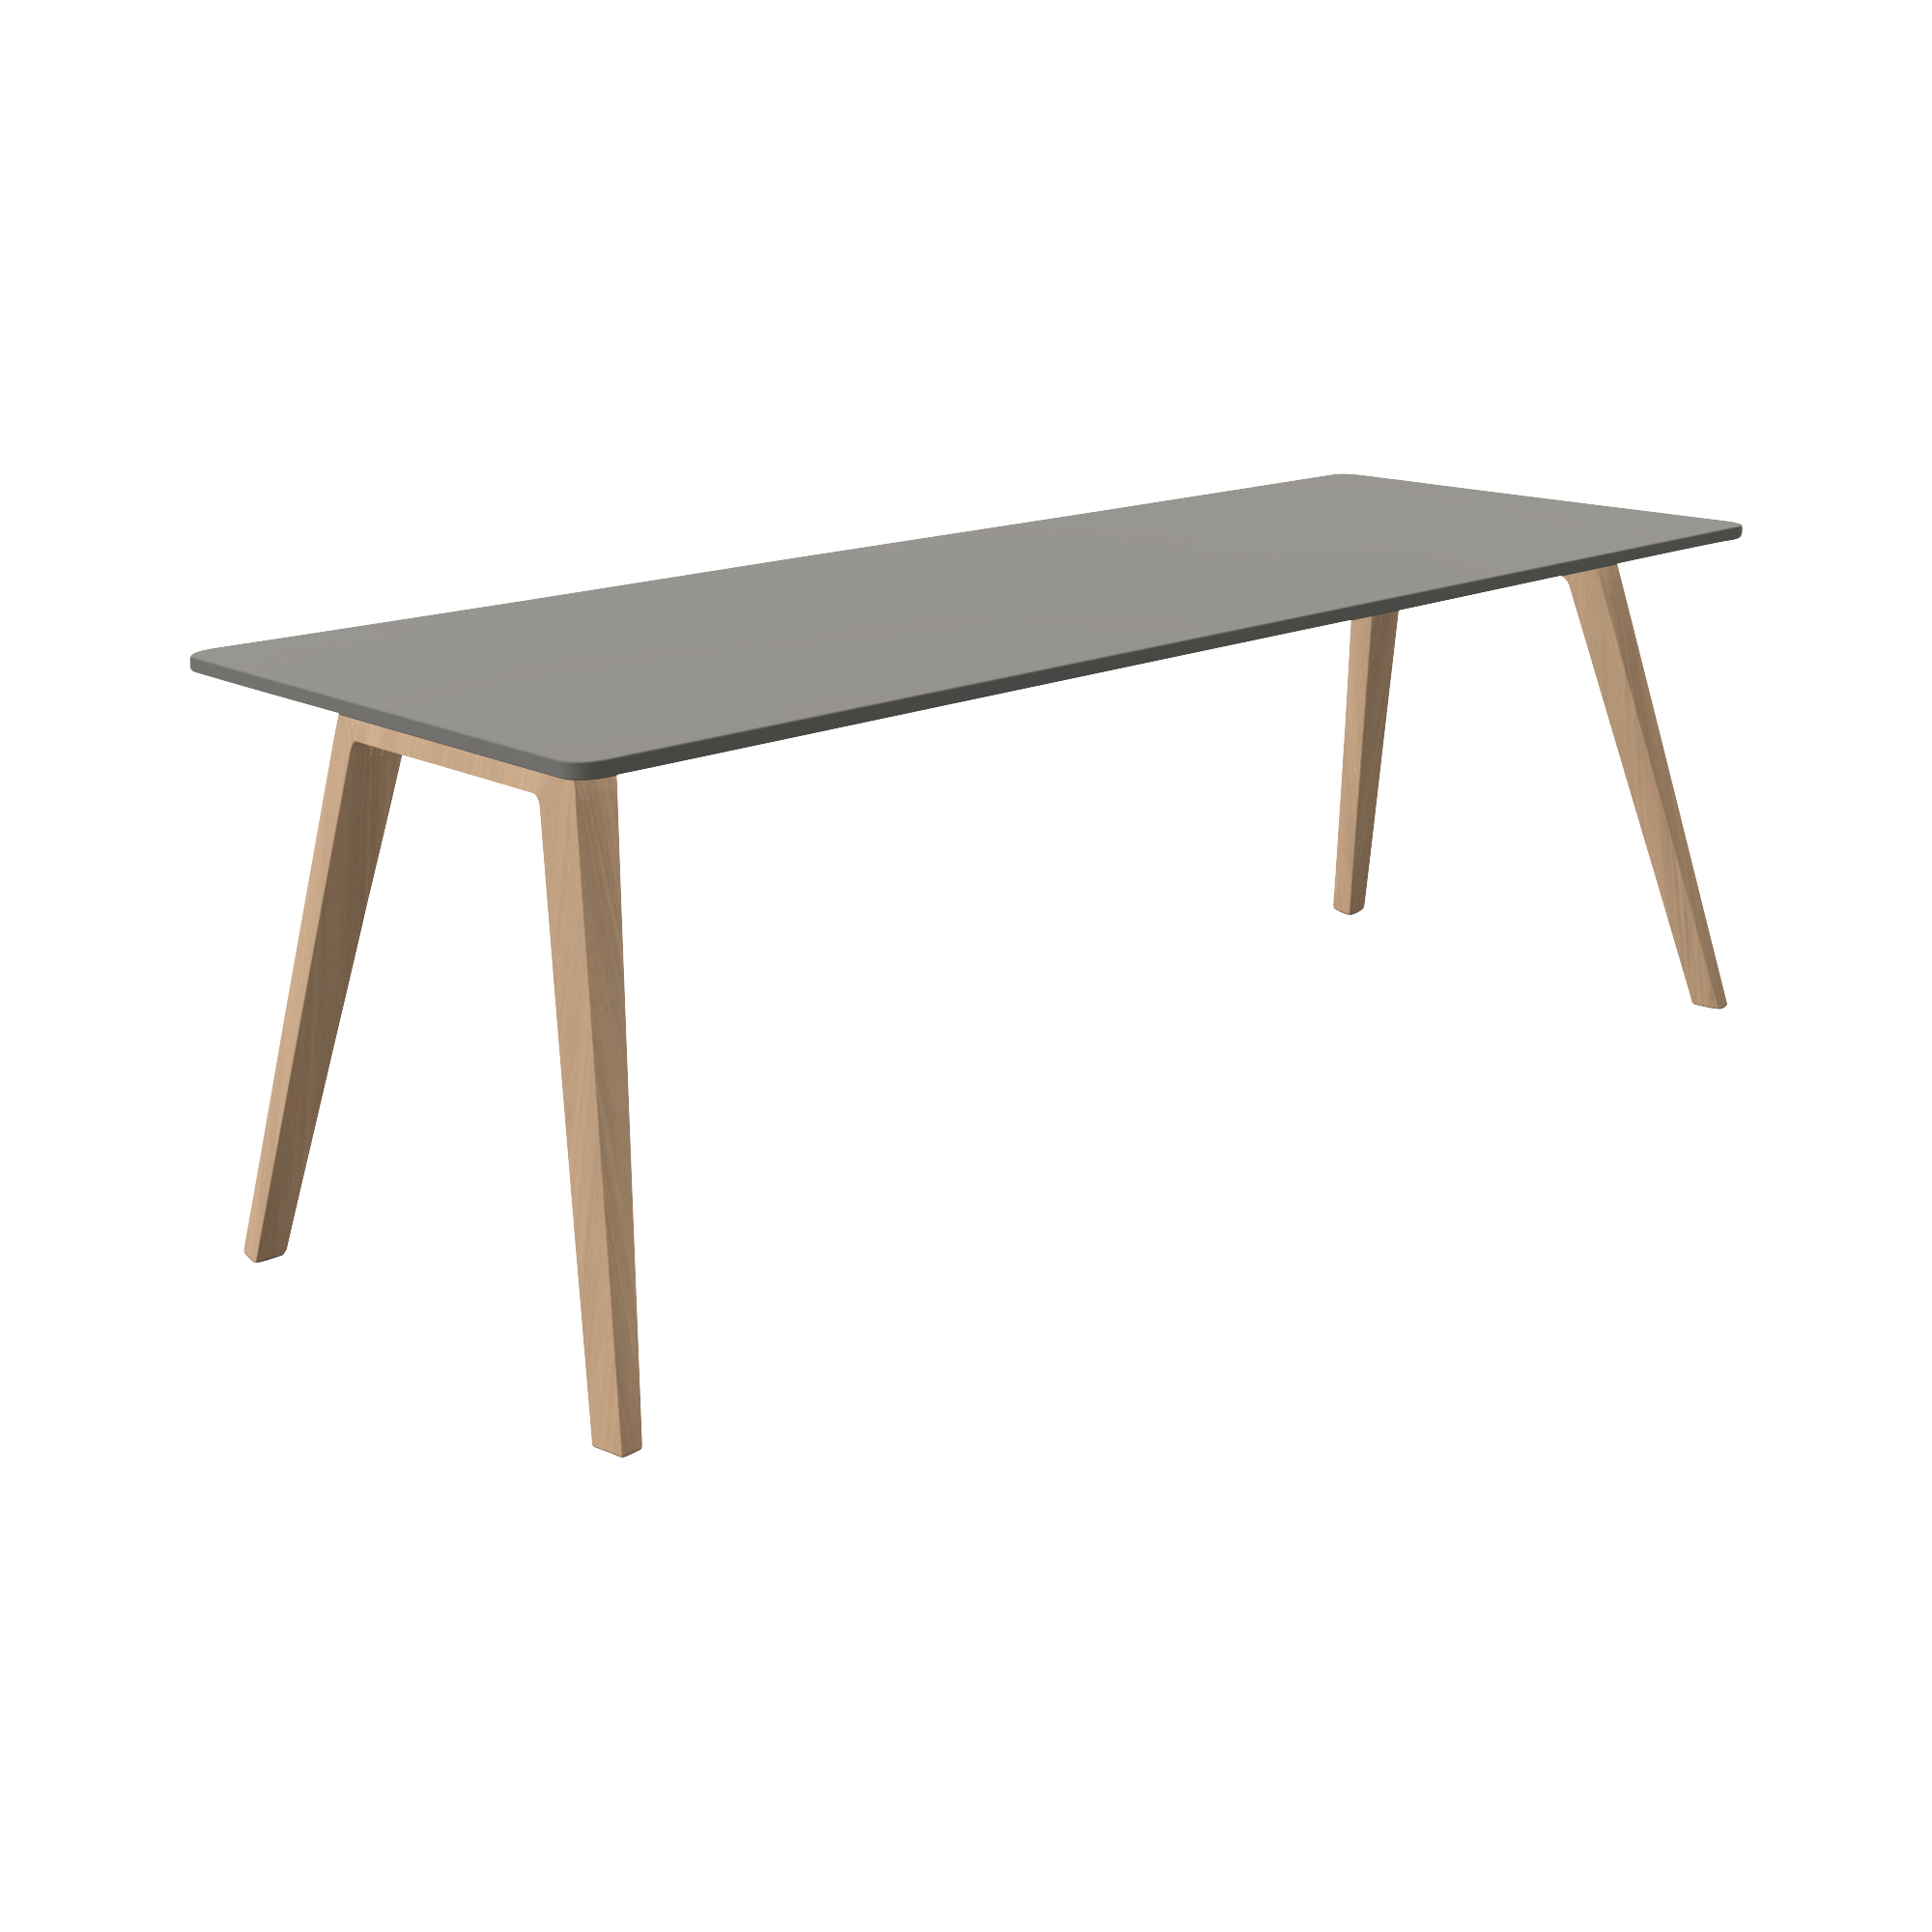 Grey rectangular table with four wooden legs